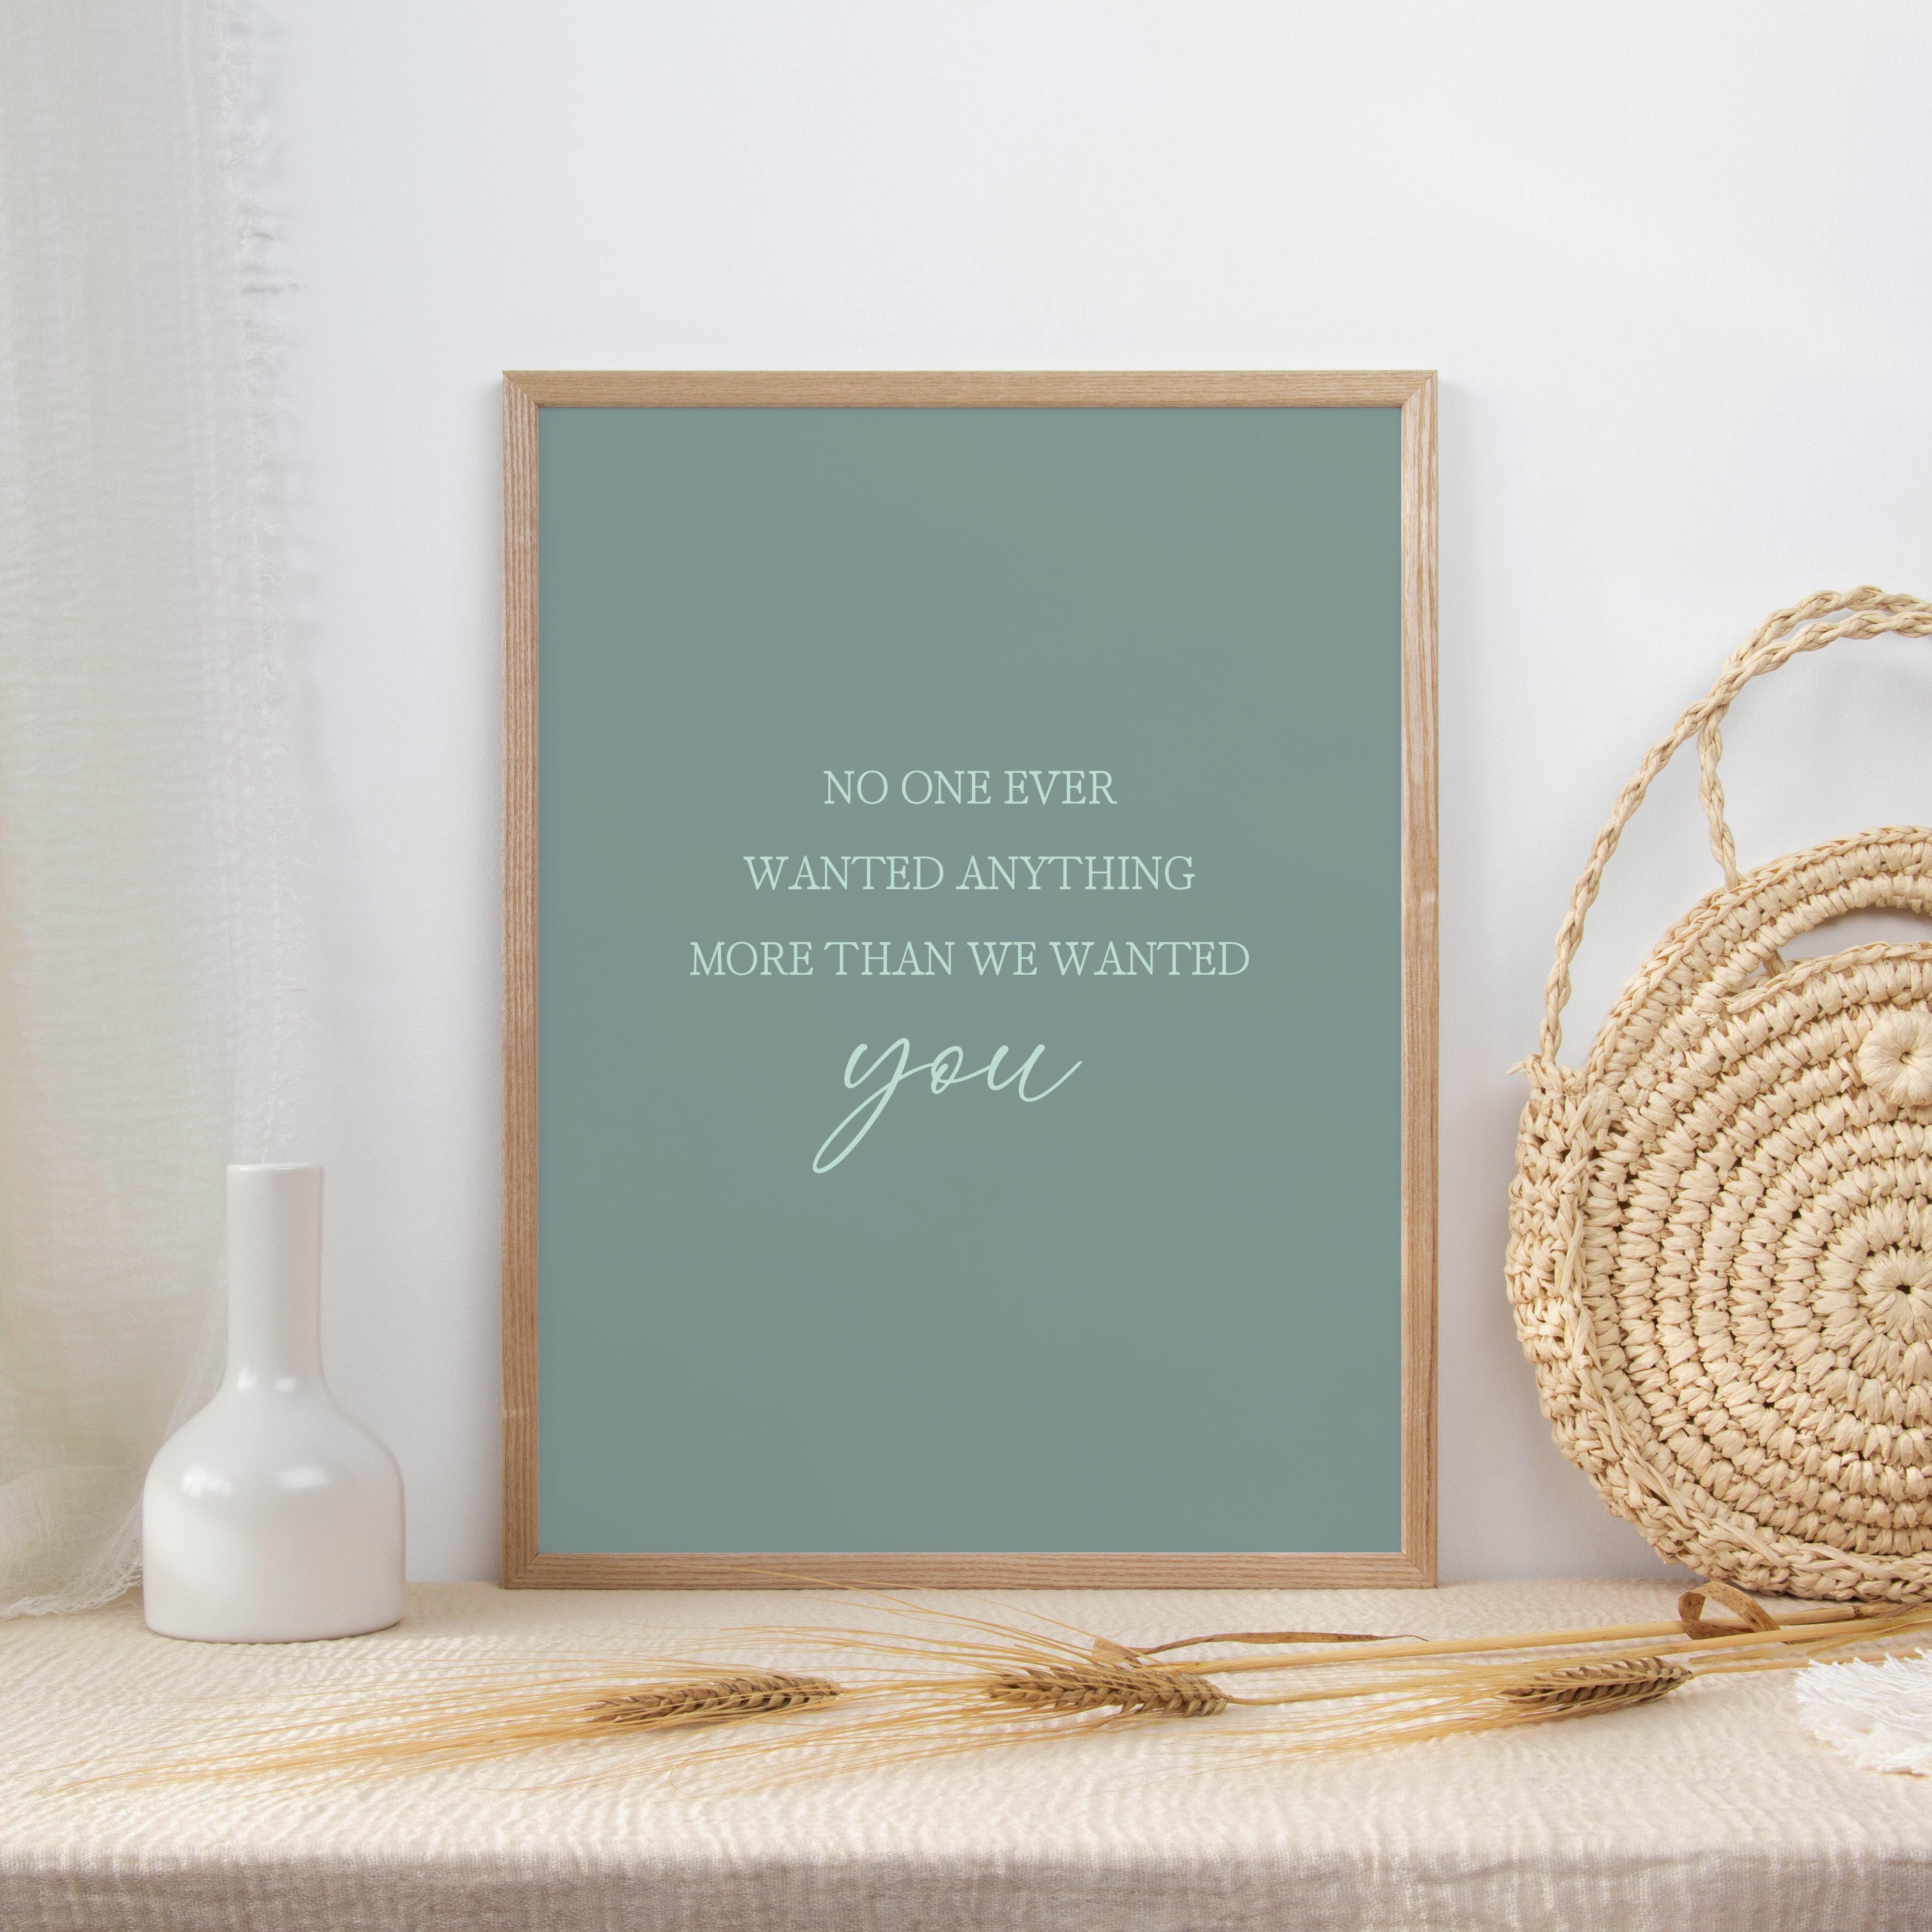 More Than We Wanted You - Opal - Quote Print Poster - The Willow Corner